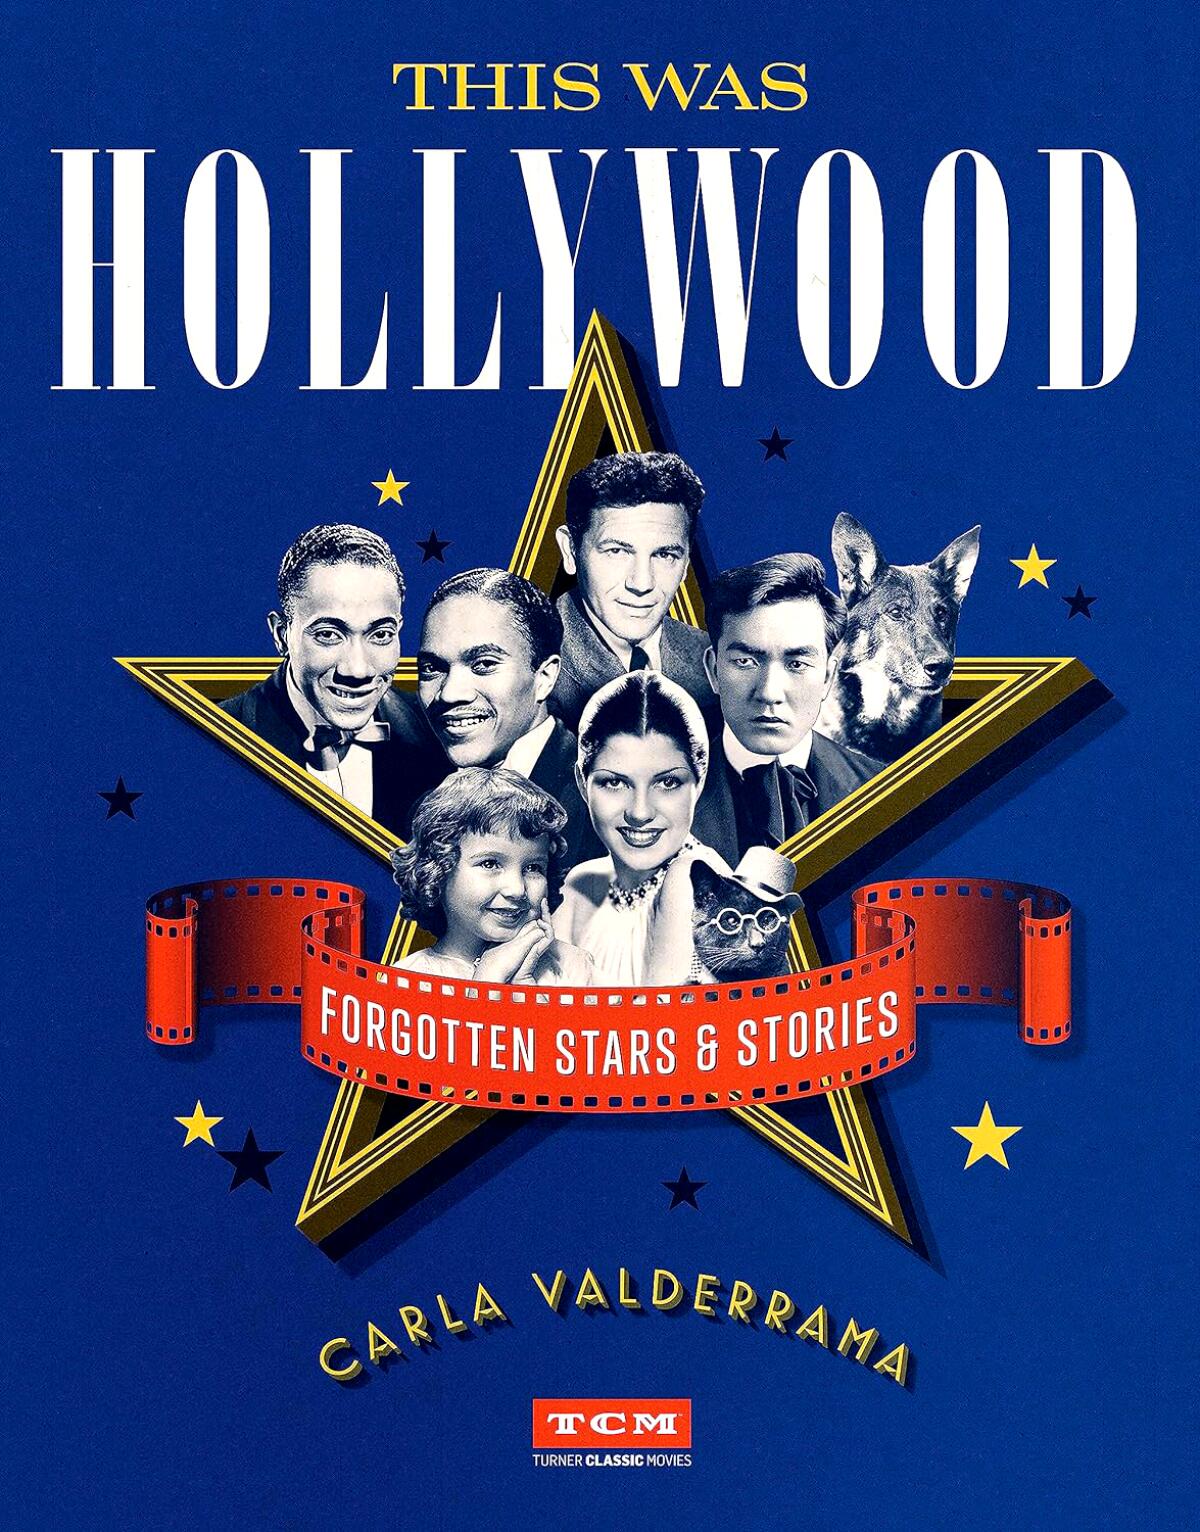 This Was Hollywood: Forgotten Stars and Stories by Carla Valderrama